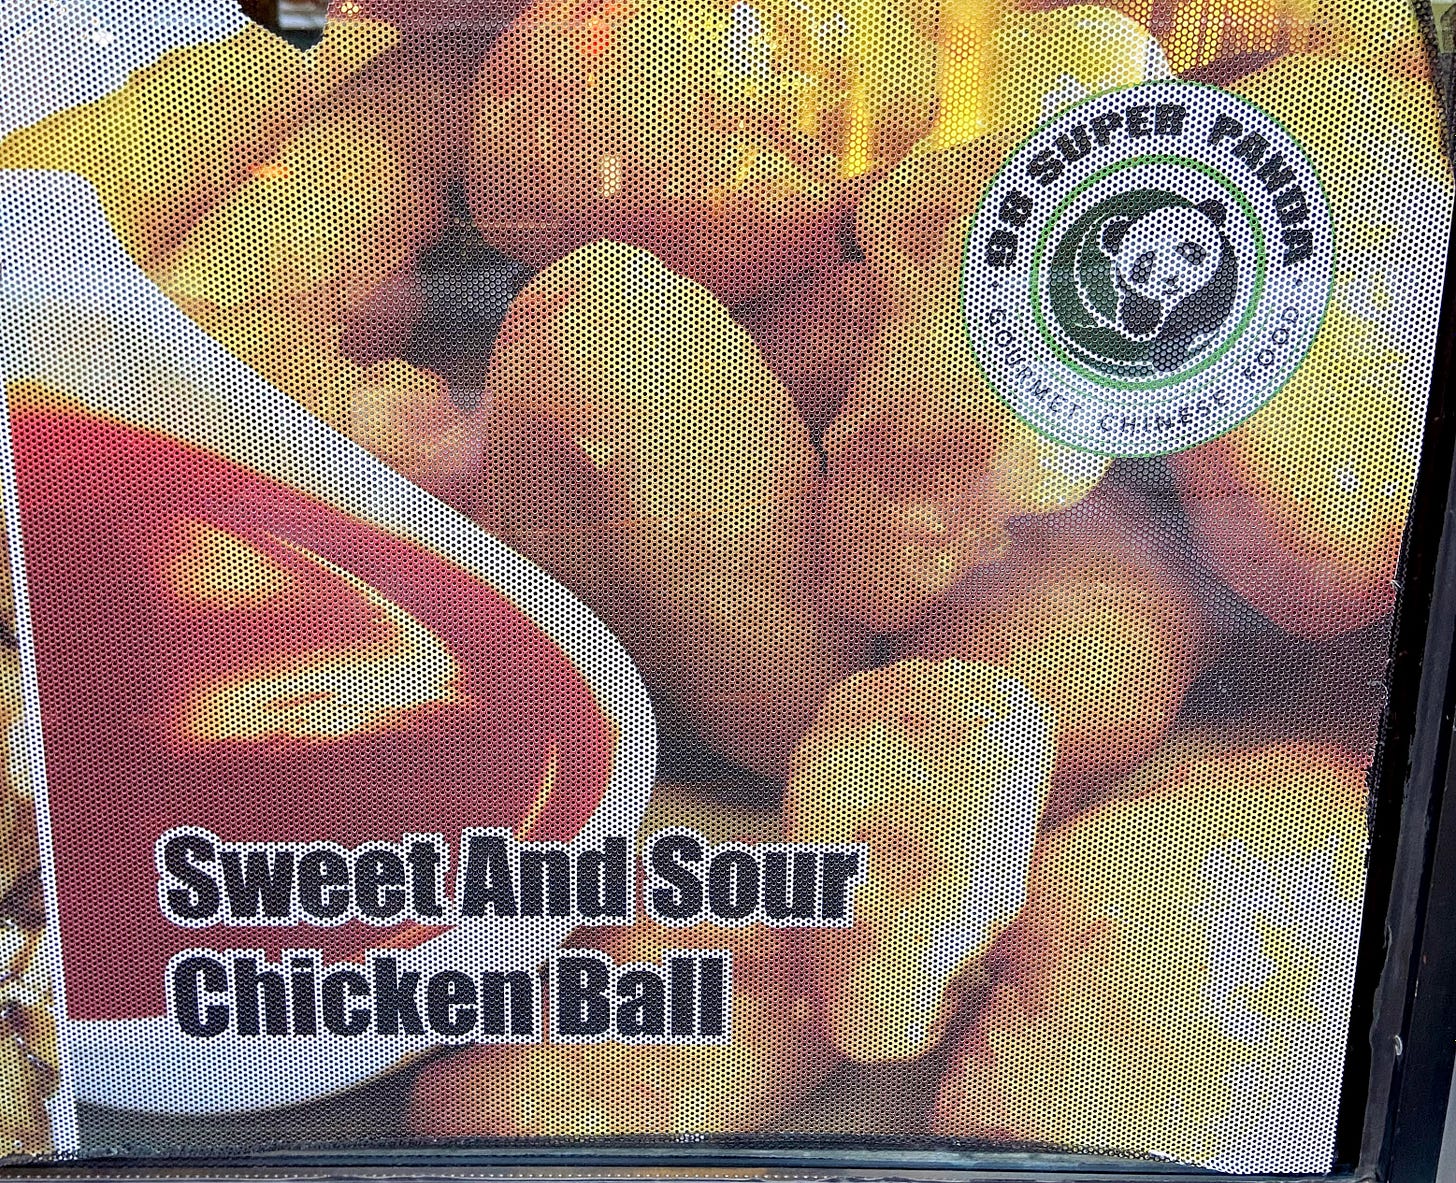 Window sign advertising sweet and sour chicken balls, with photo of chicken balls